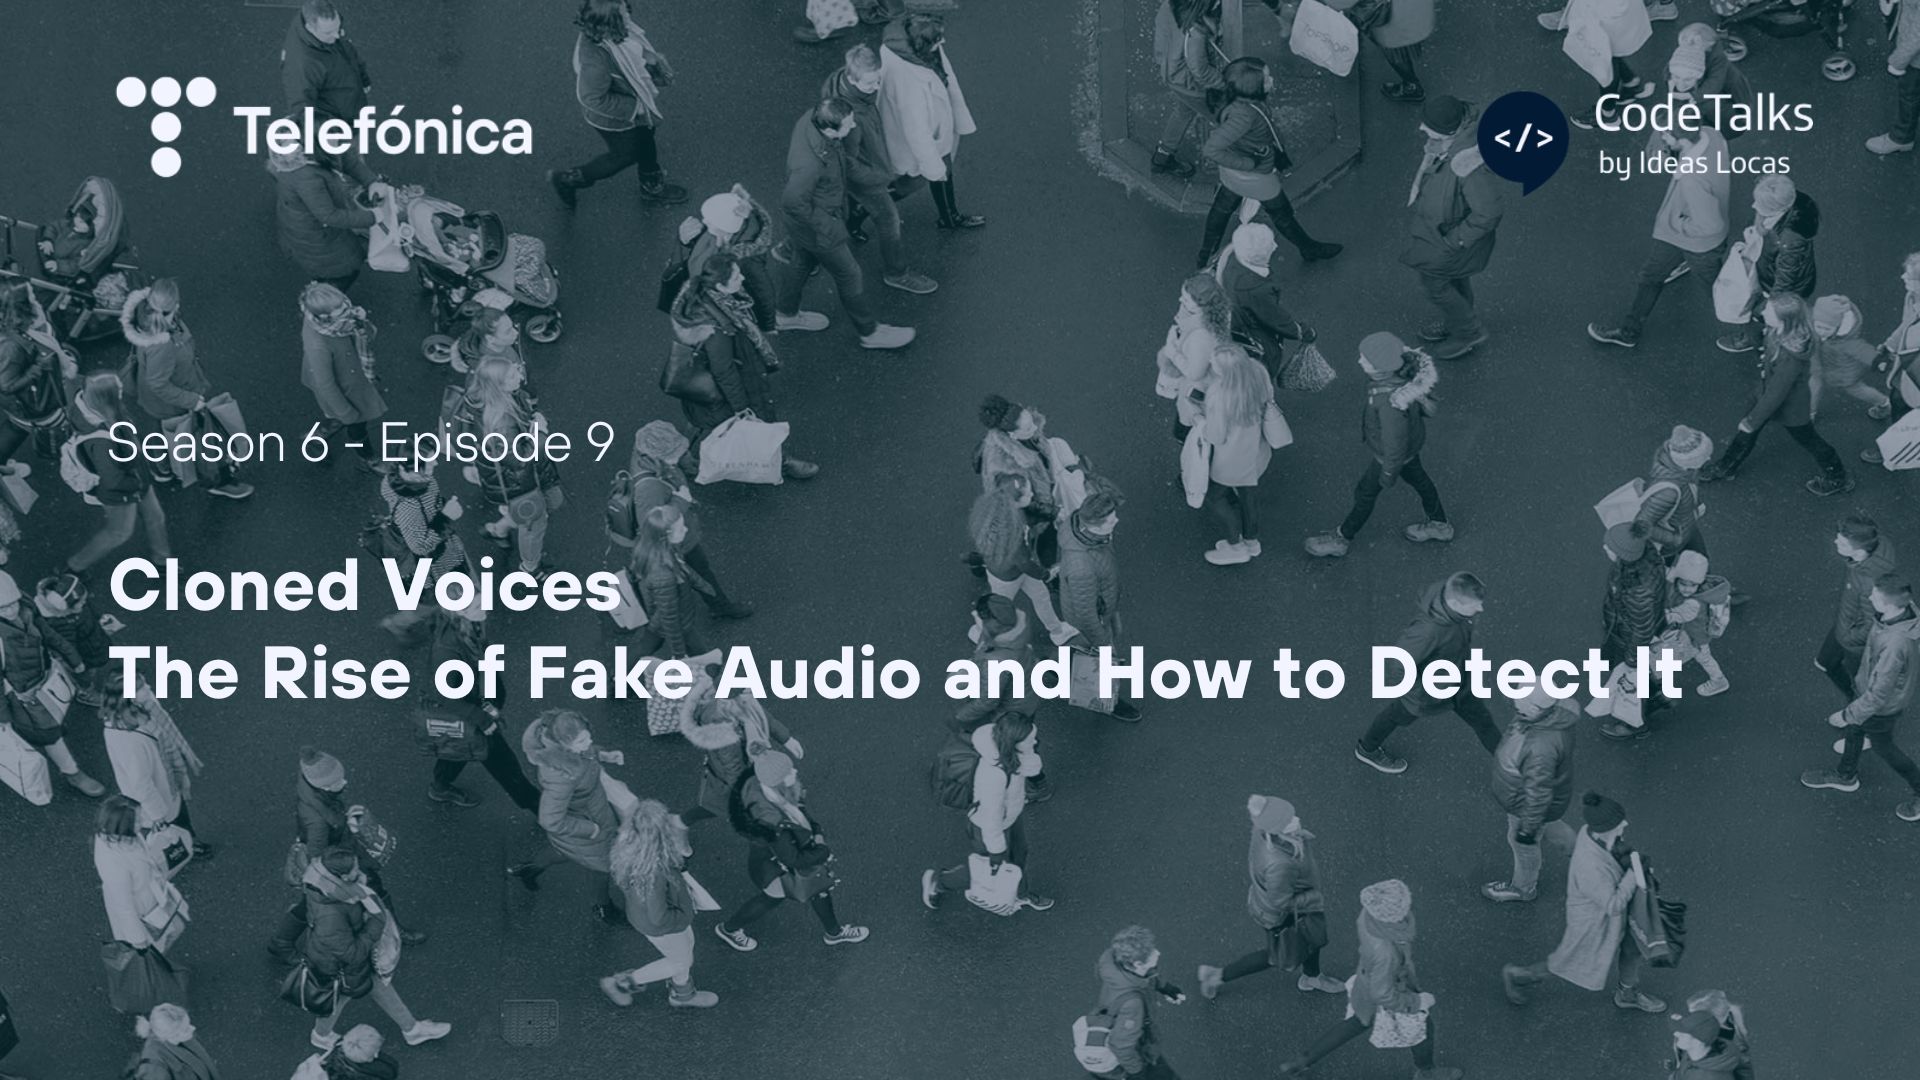 Clone Voices: The rise of fake audio and how to detect it